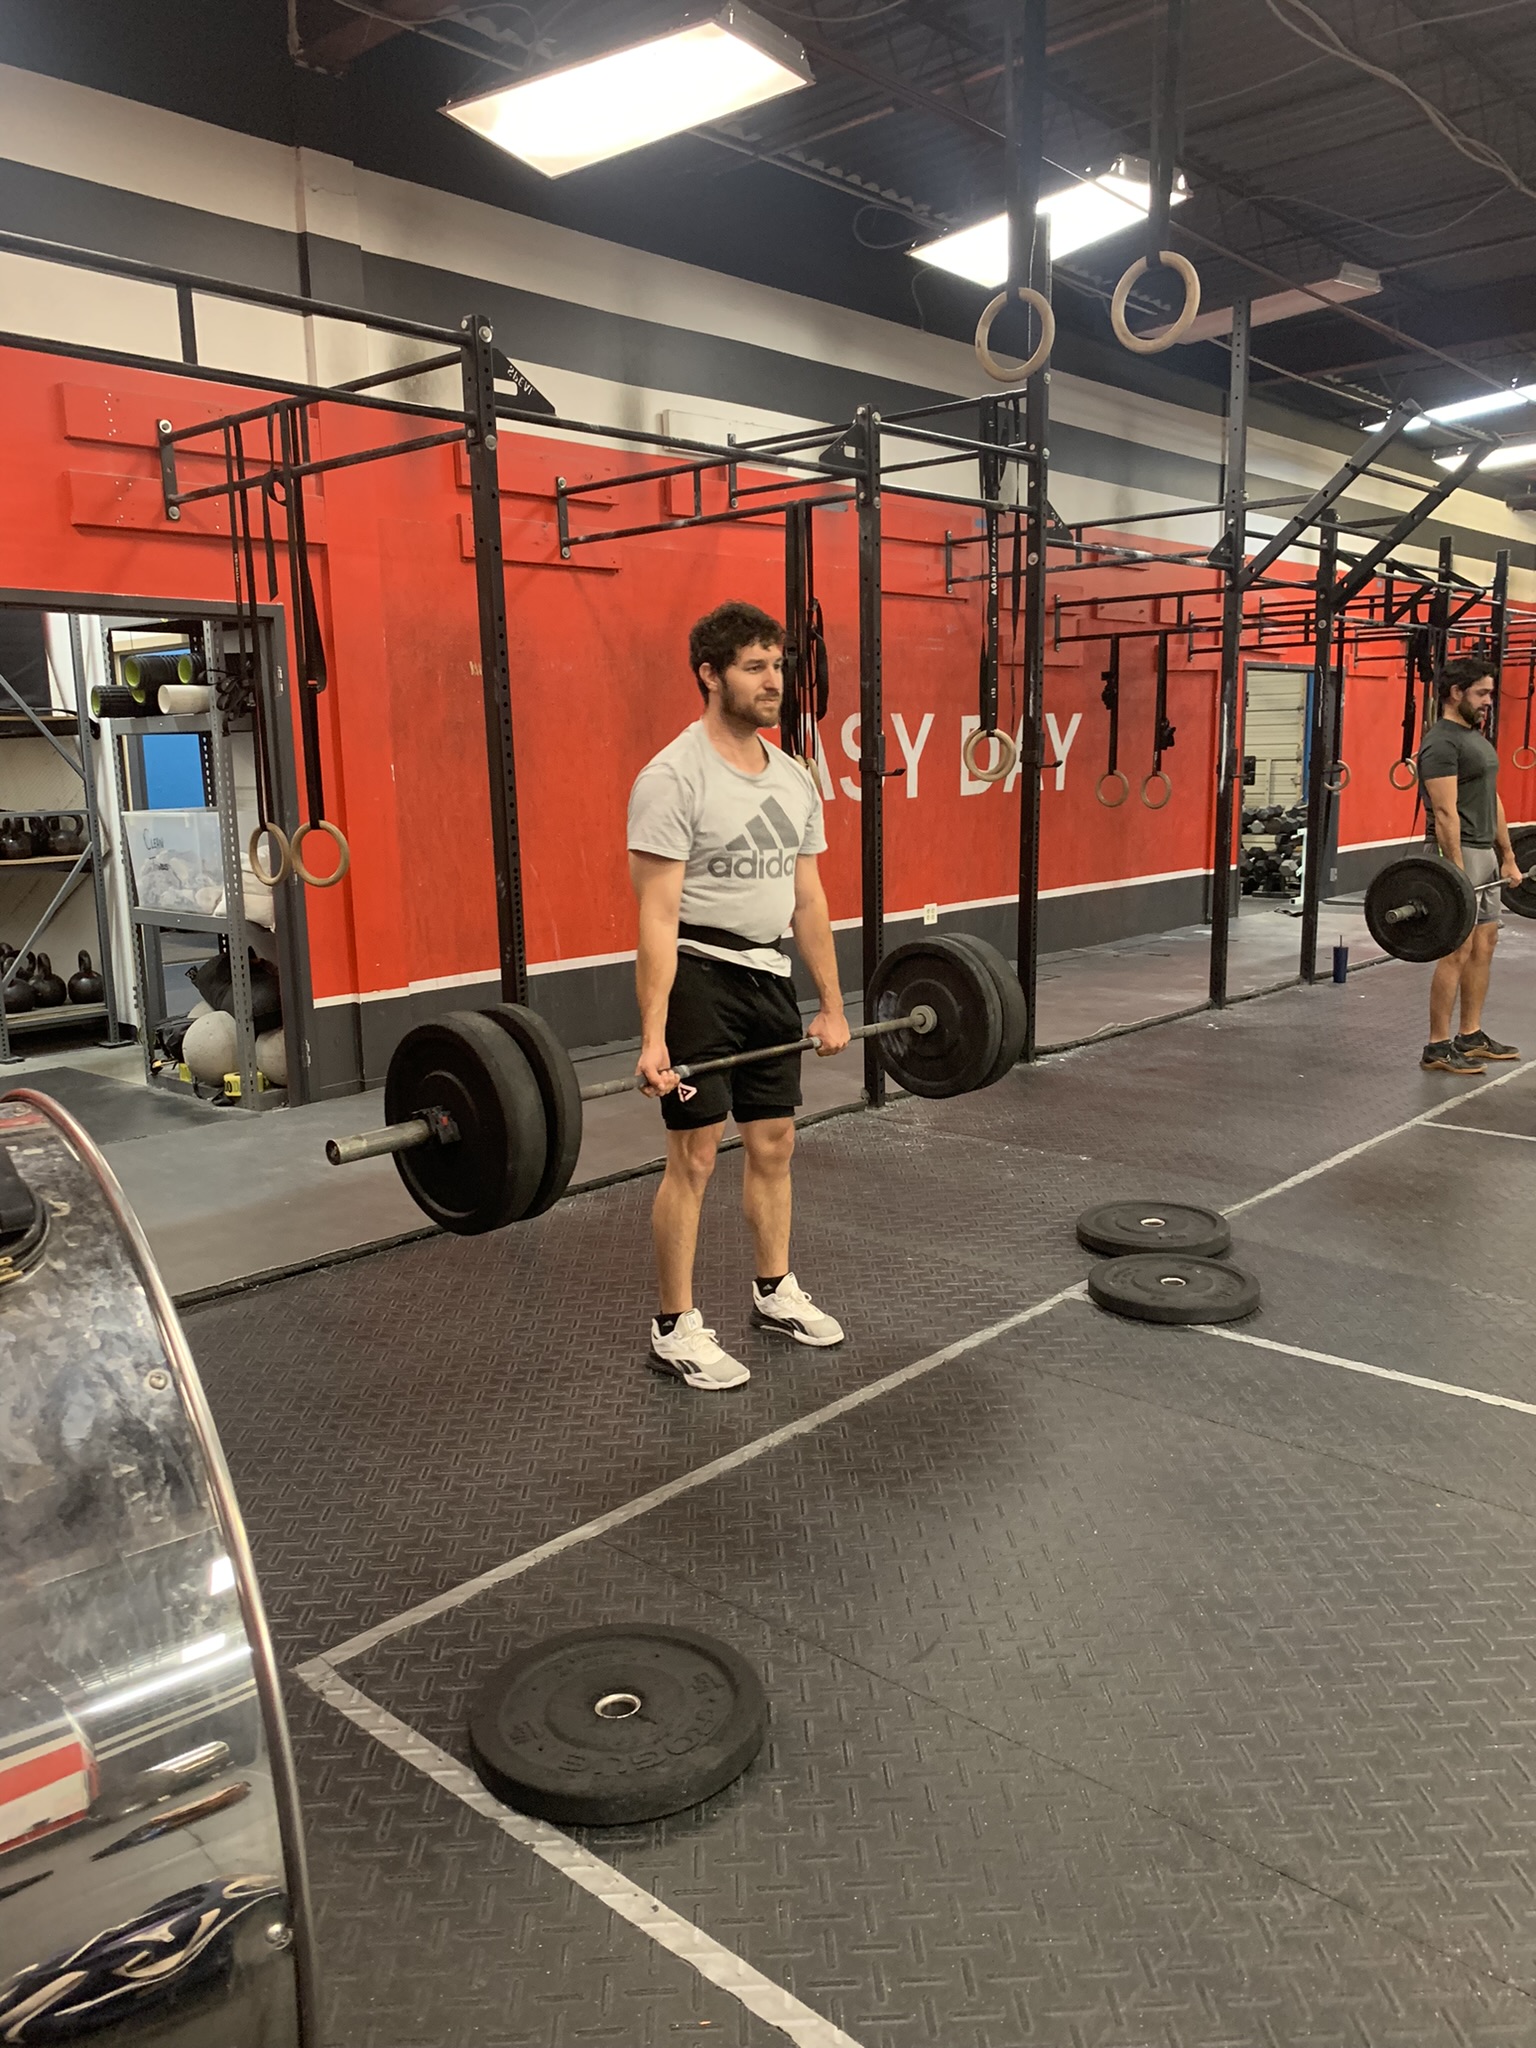 Chris canaday�s bday wod